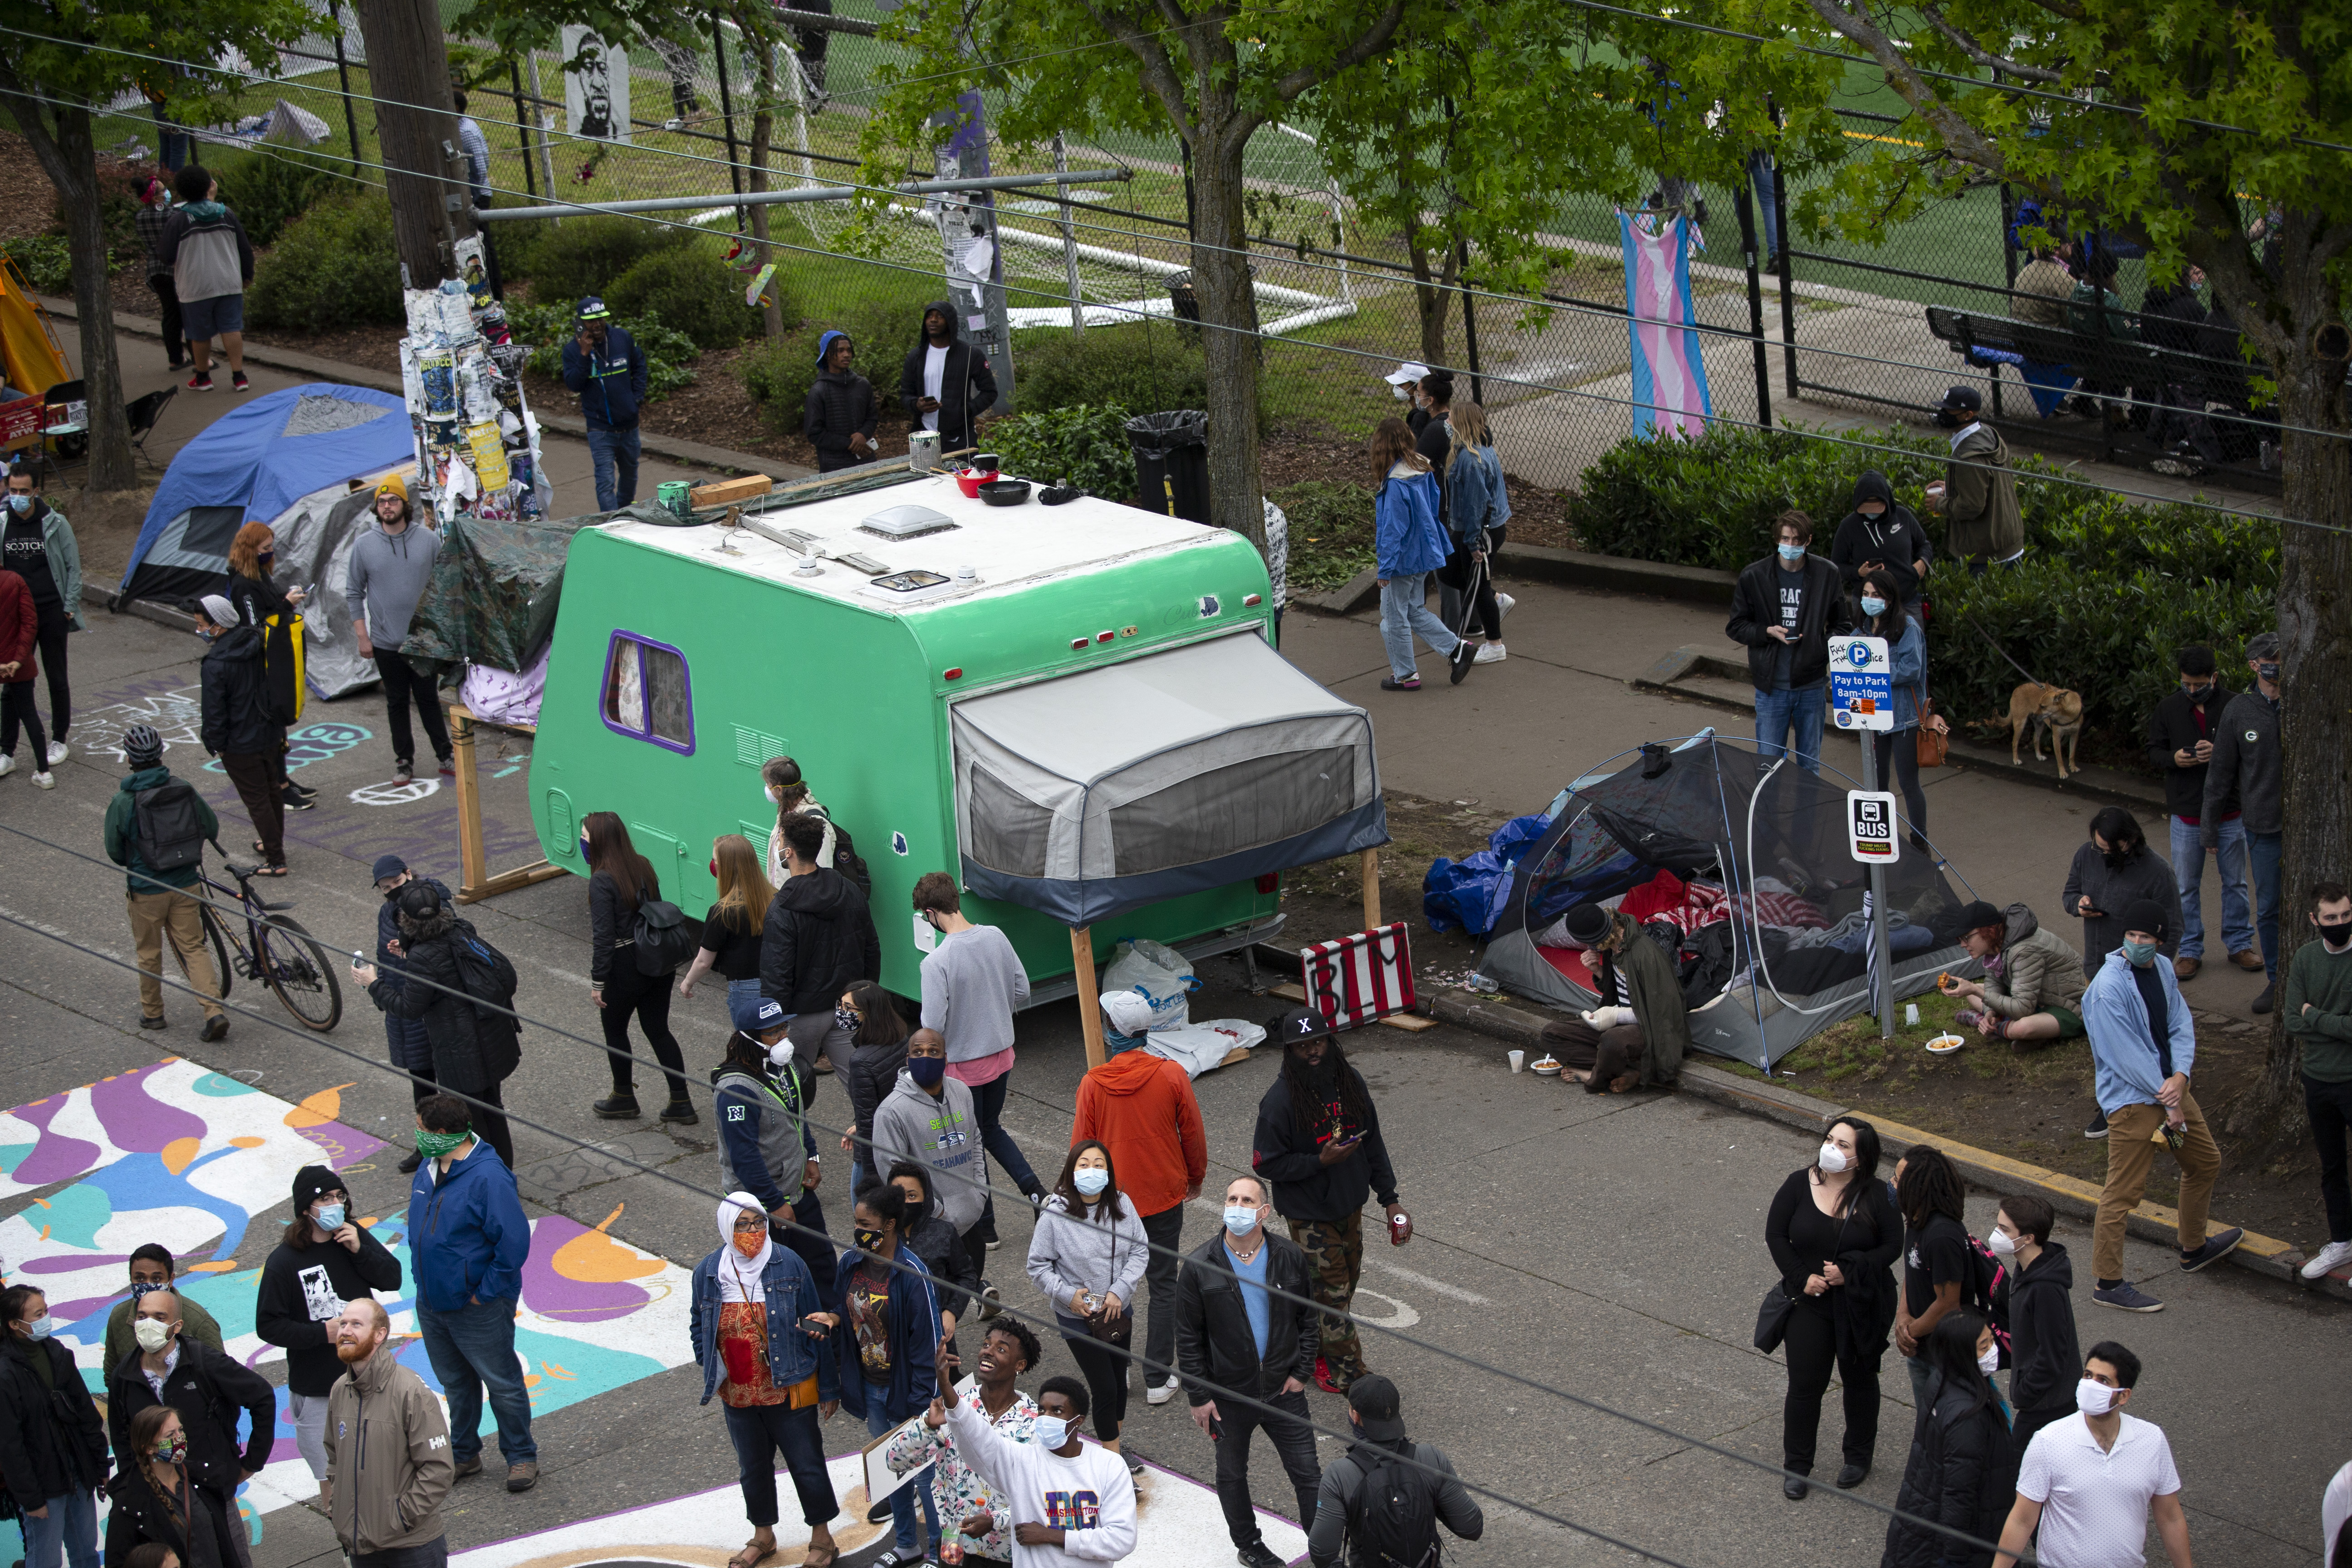 Tents and campers are set up in an area dubbed the Capitol Hill Autonomous Zone (CHAZ) on June 12, 2020 in Seattle, Washington. (Karen Ducey/Getty Images)